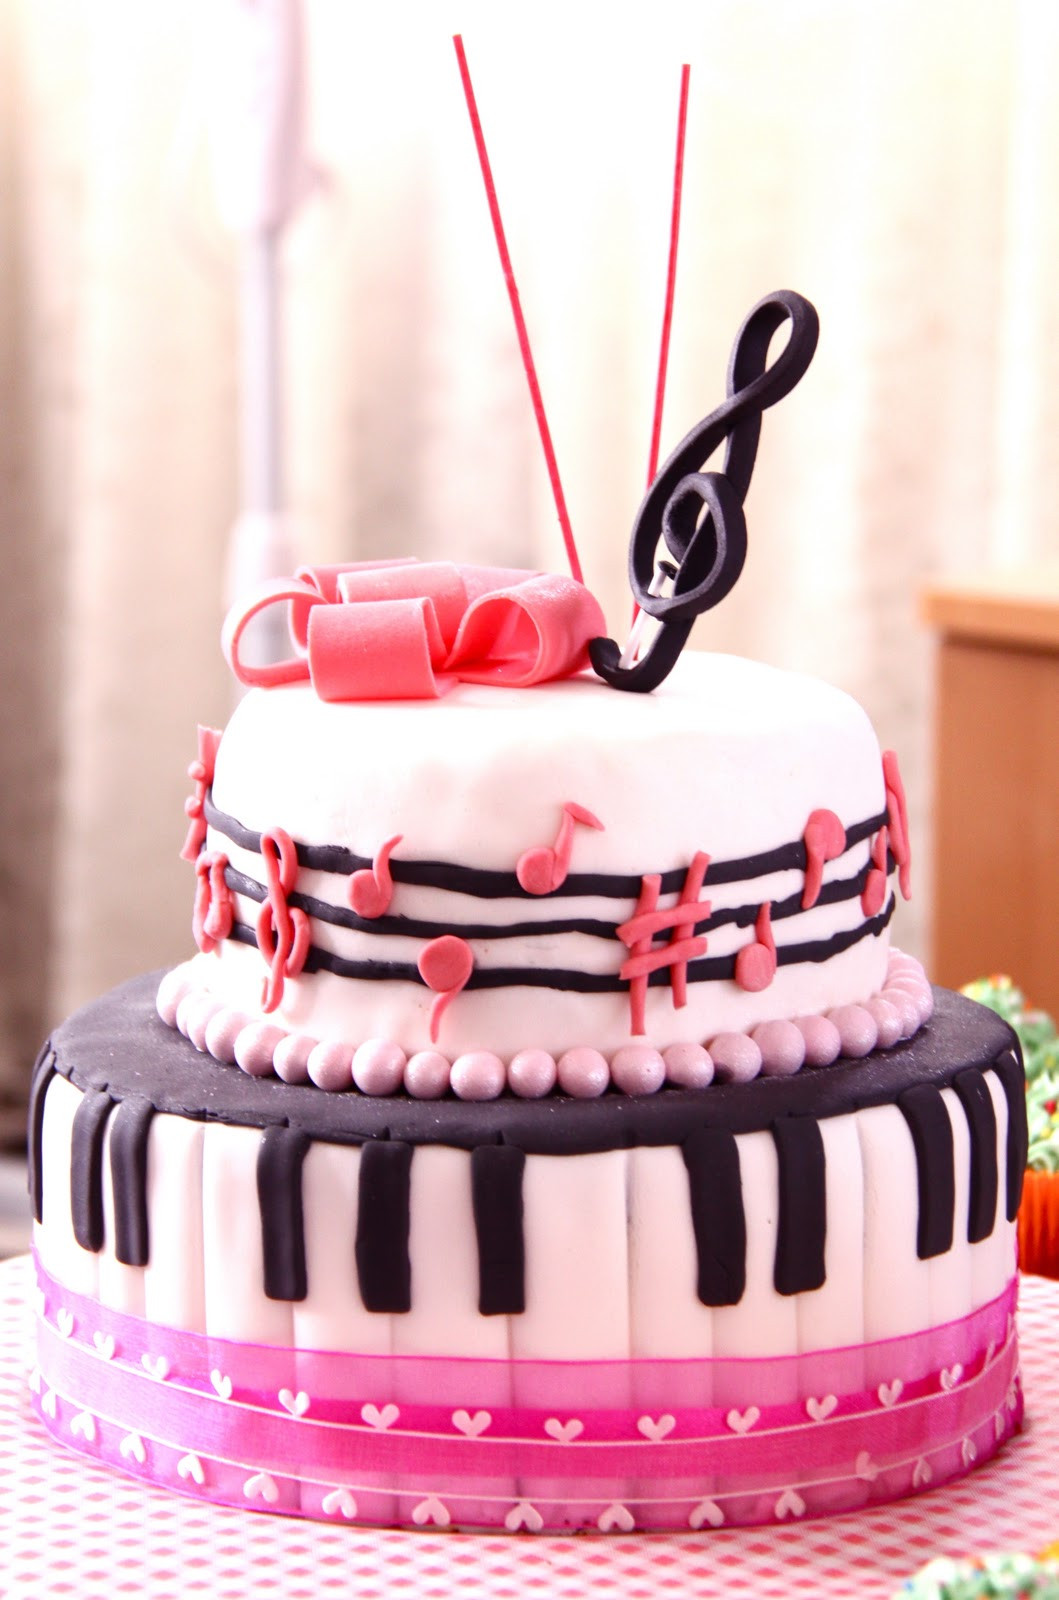 Music Birthday Cakes
 Sweet Art Cakes by Milbreé Moments Rikka s musical